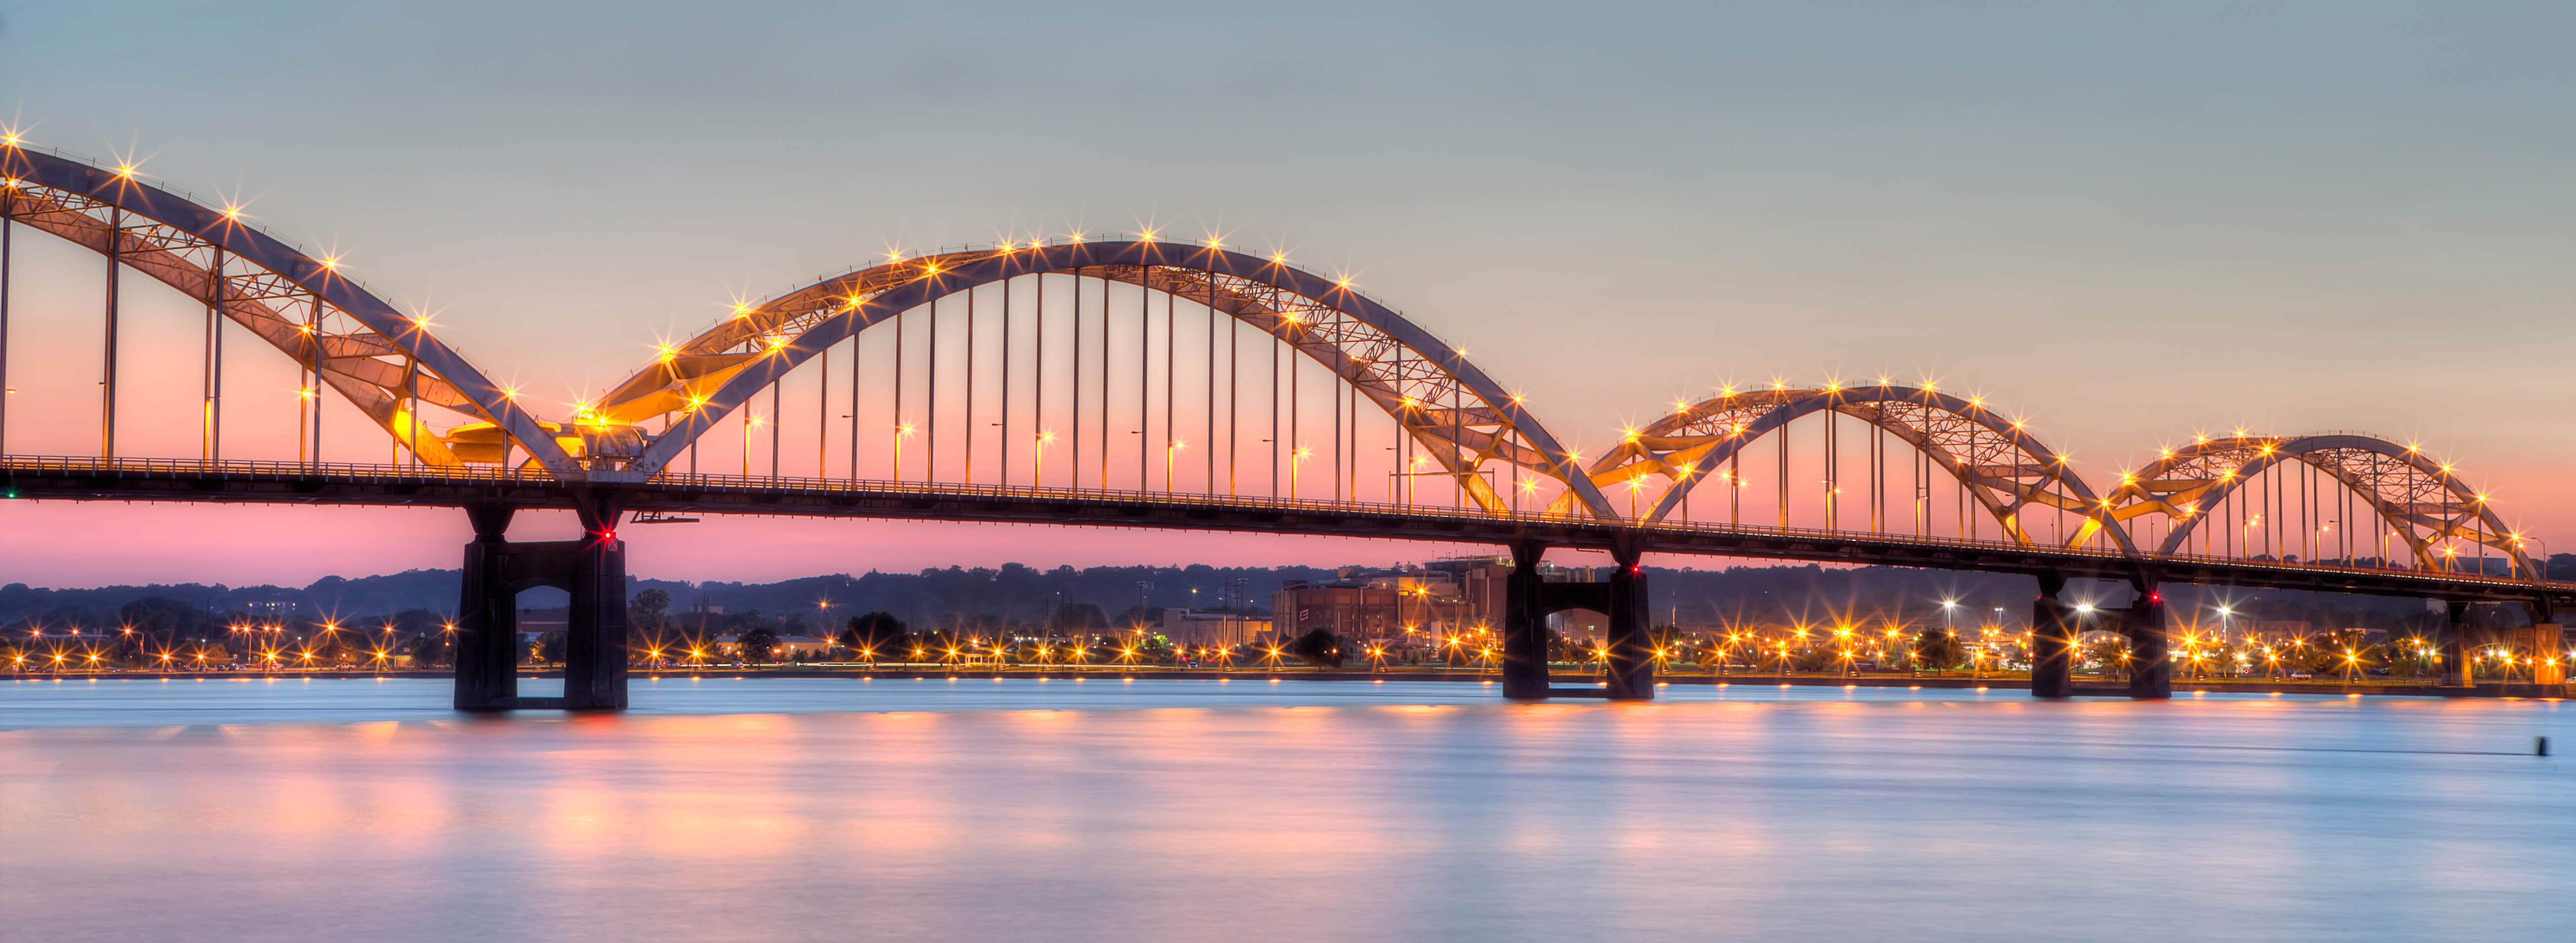 Image of Mississippi bridge on our Chiropractic Online CE page